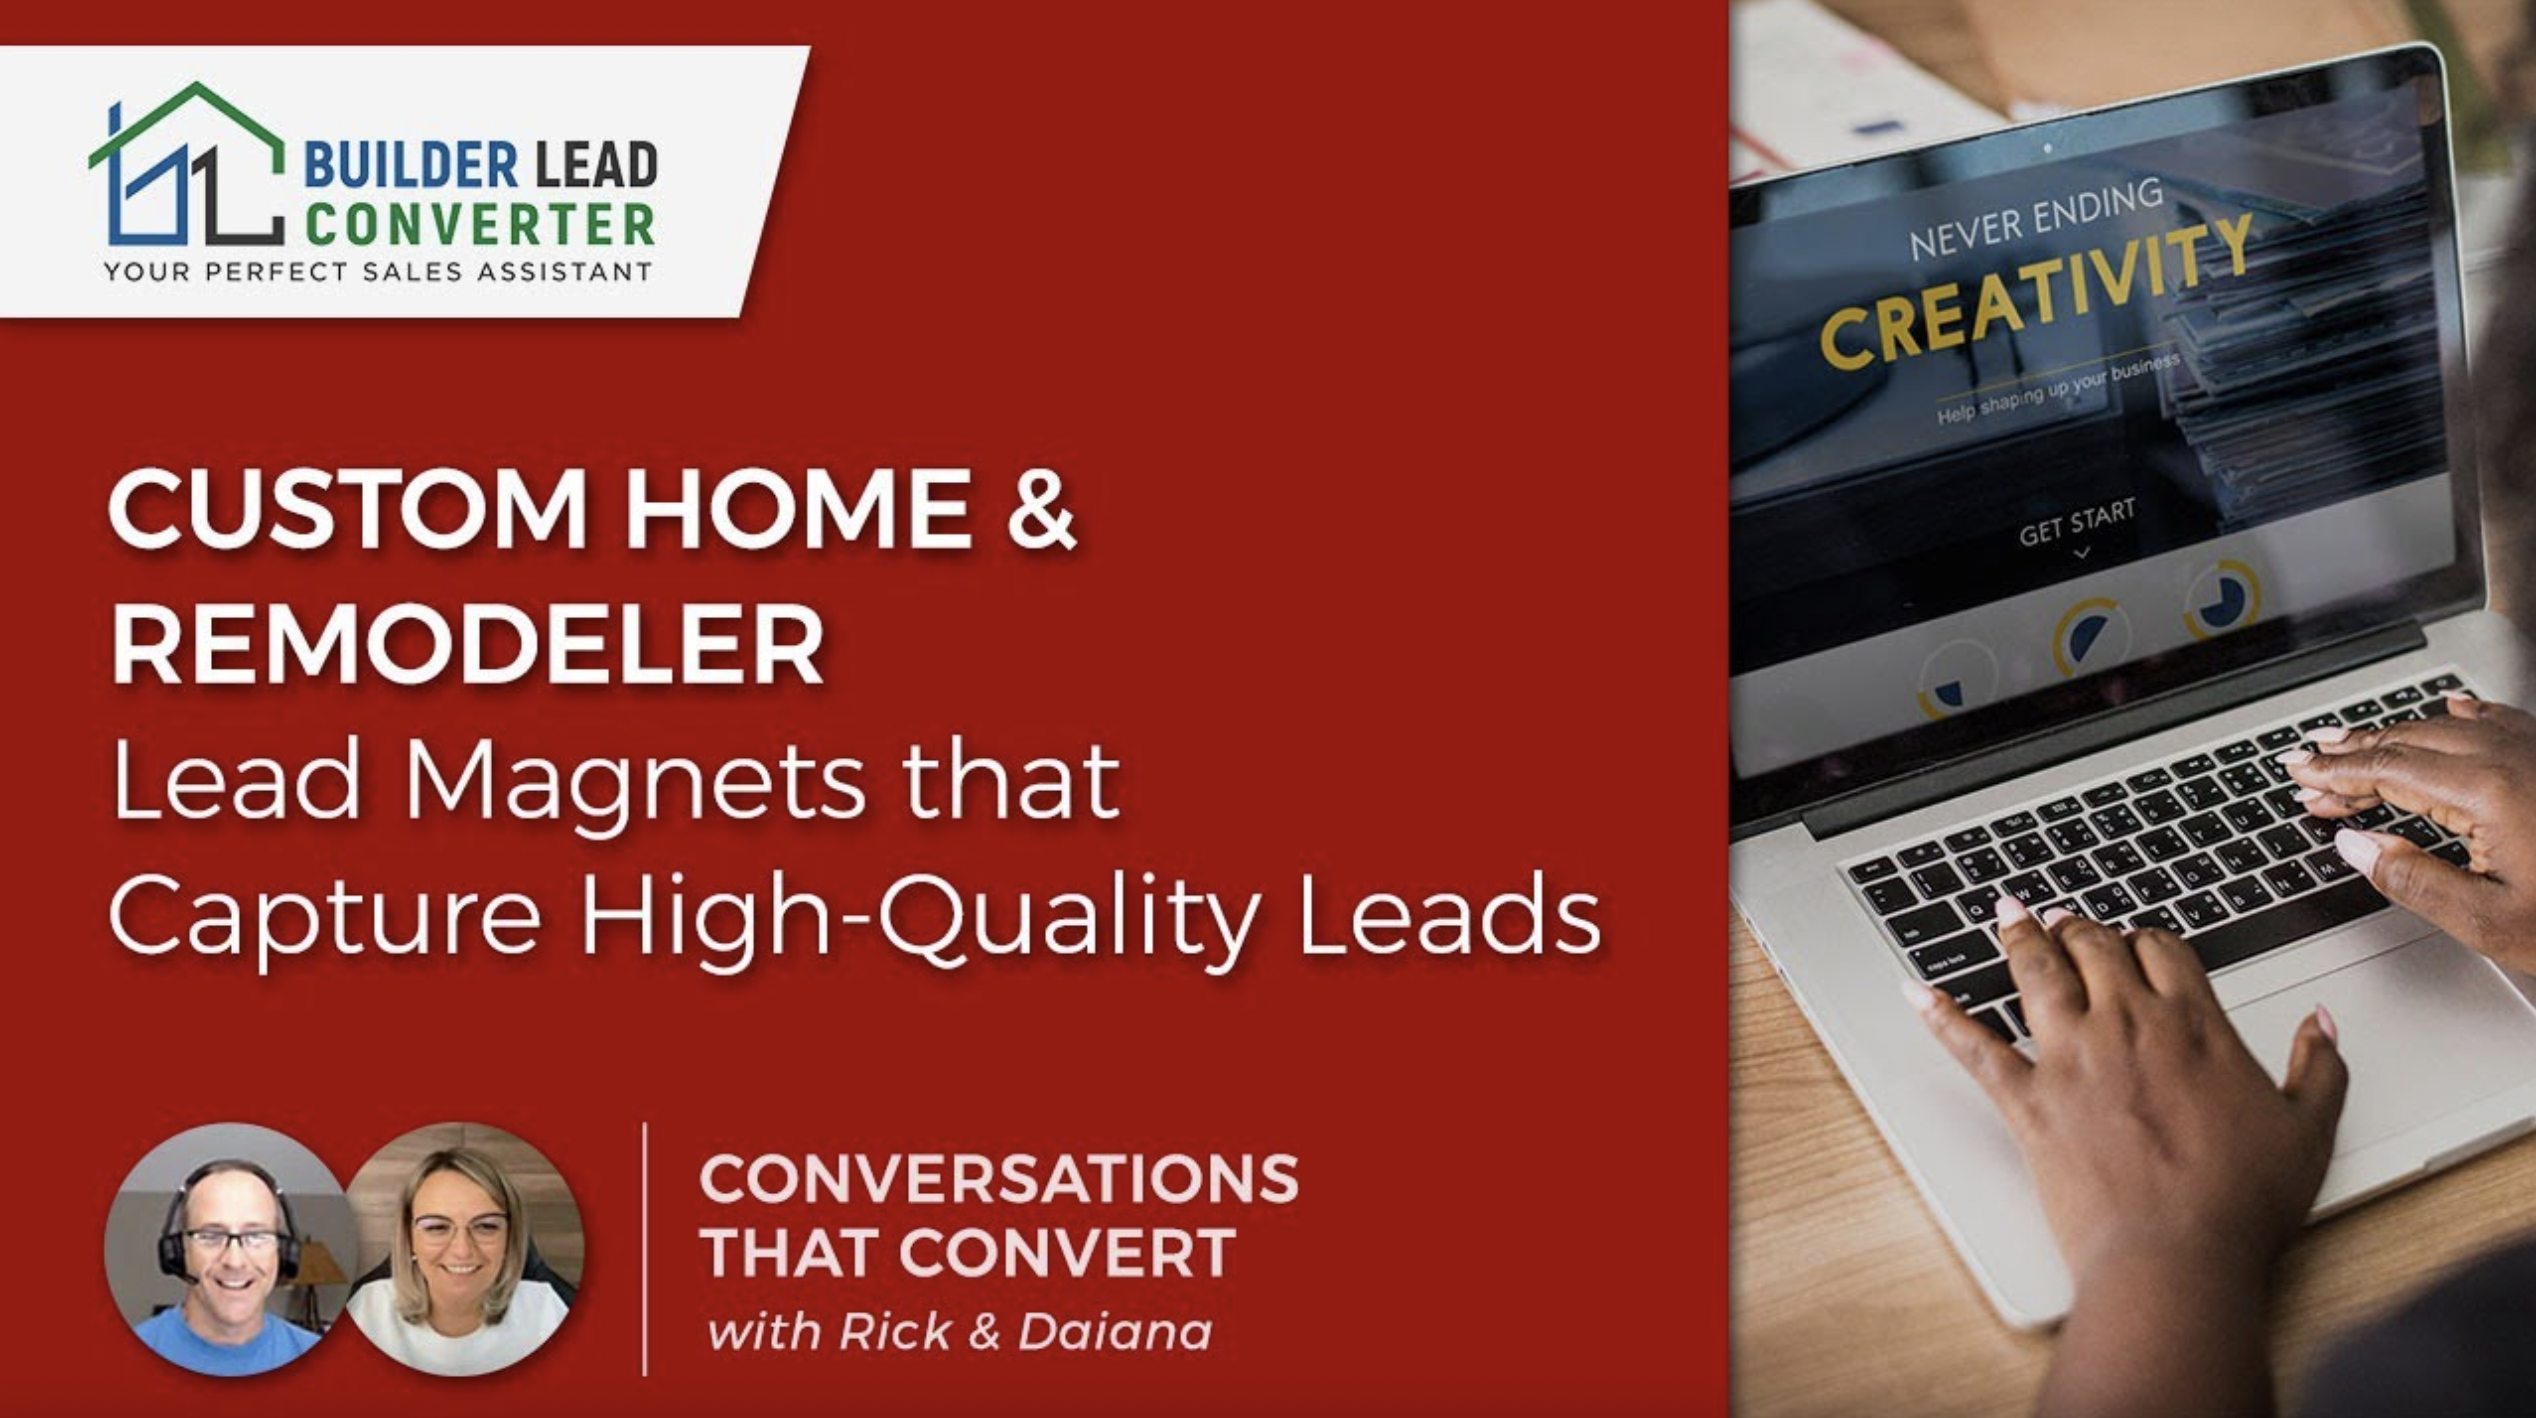 Custom Home & Remodeler Lead Magnets that CAPTURE High-Quality Leads